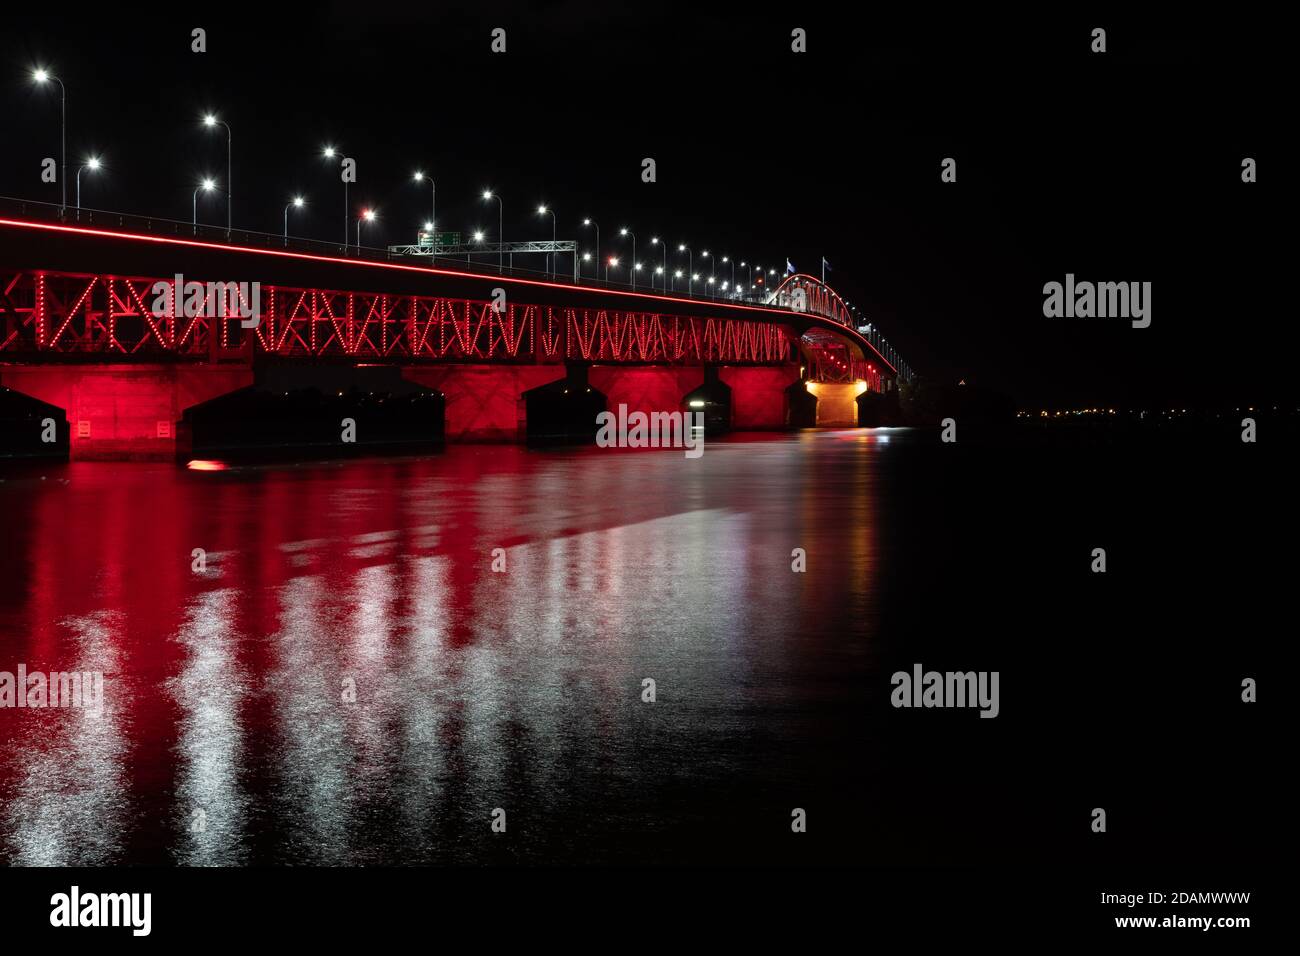 The Auckland Harbour (harbor) Bridge is lit up in red as part of the ANZAC commemoration held on the 25th of April each year. Stock Photo